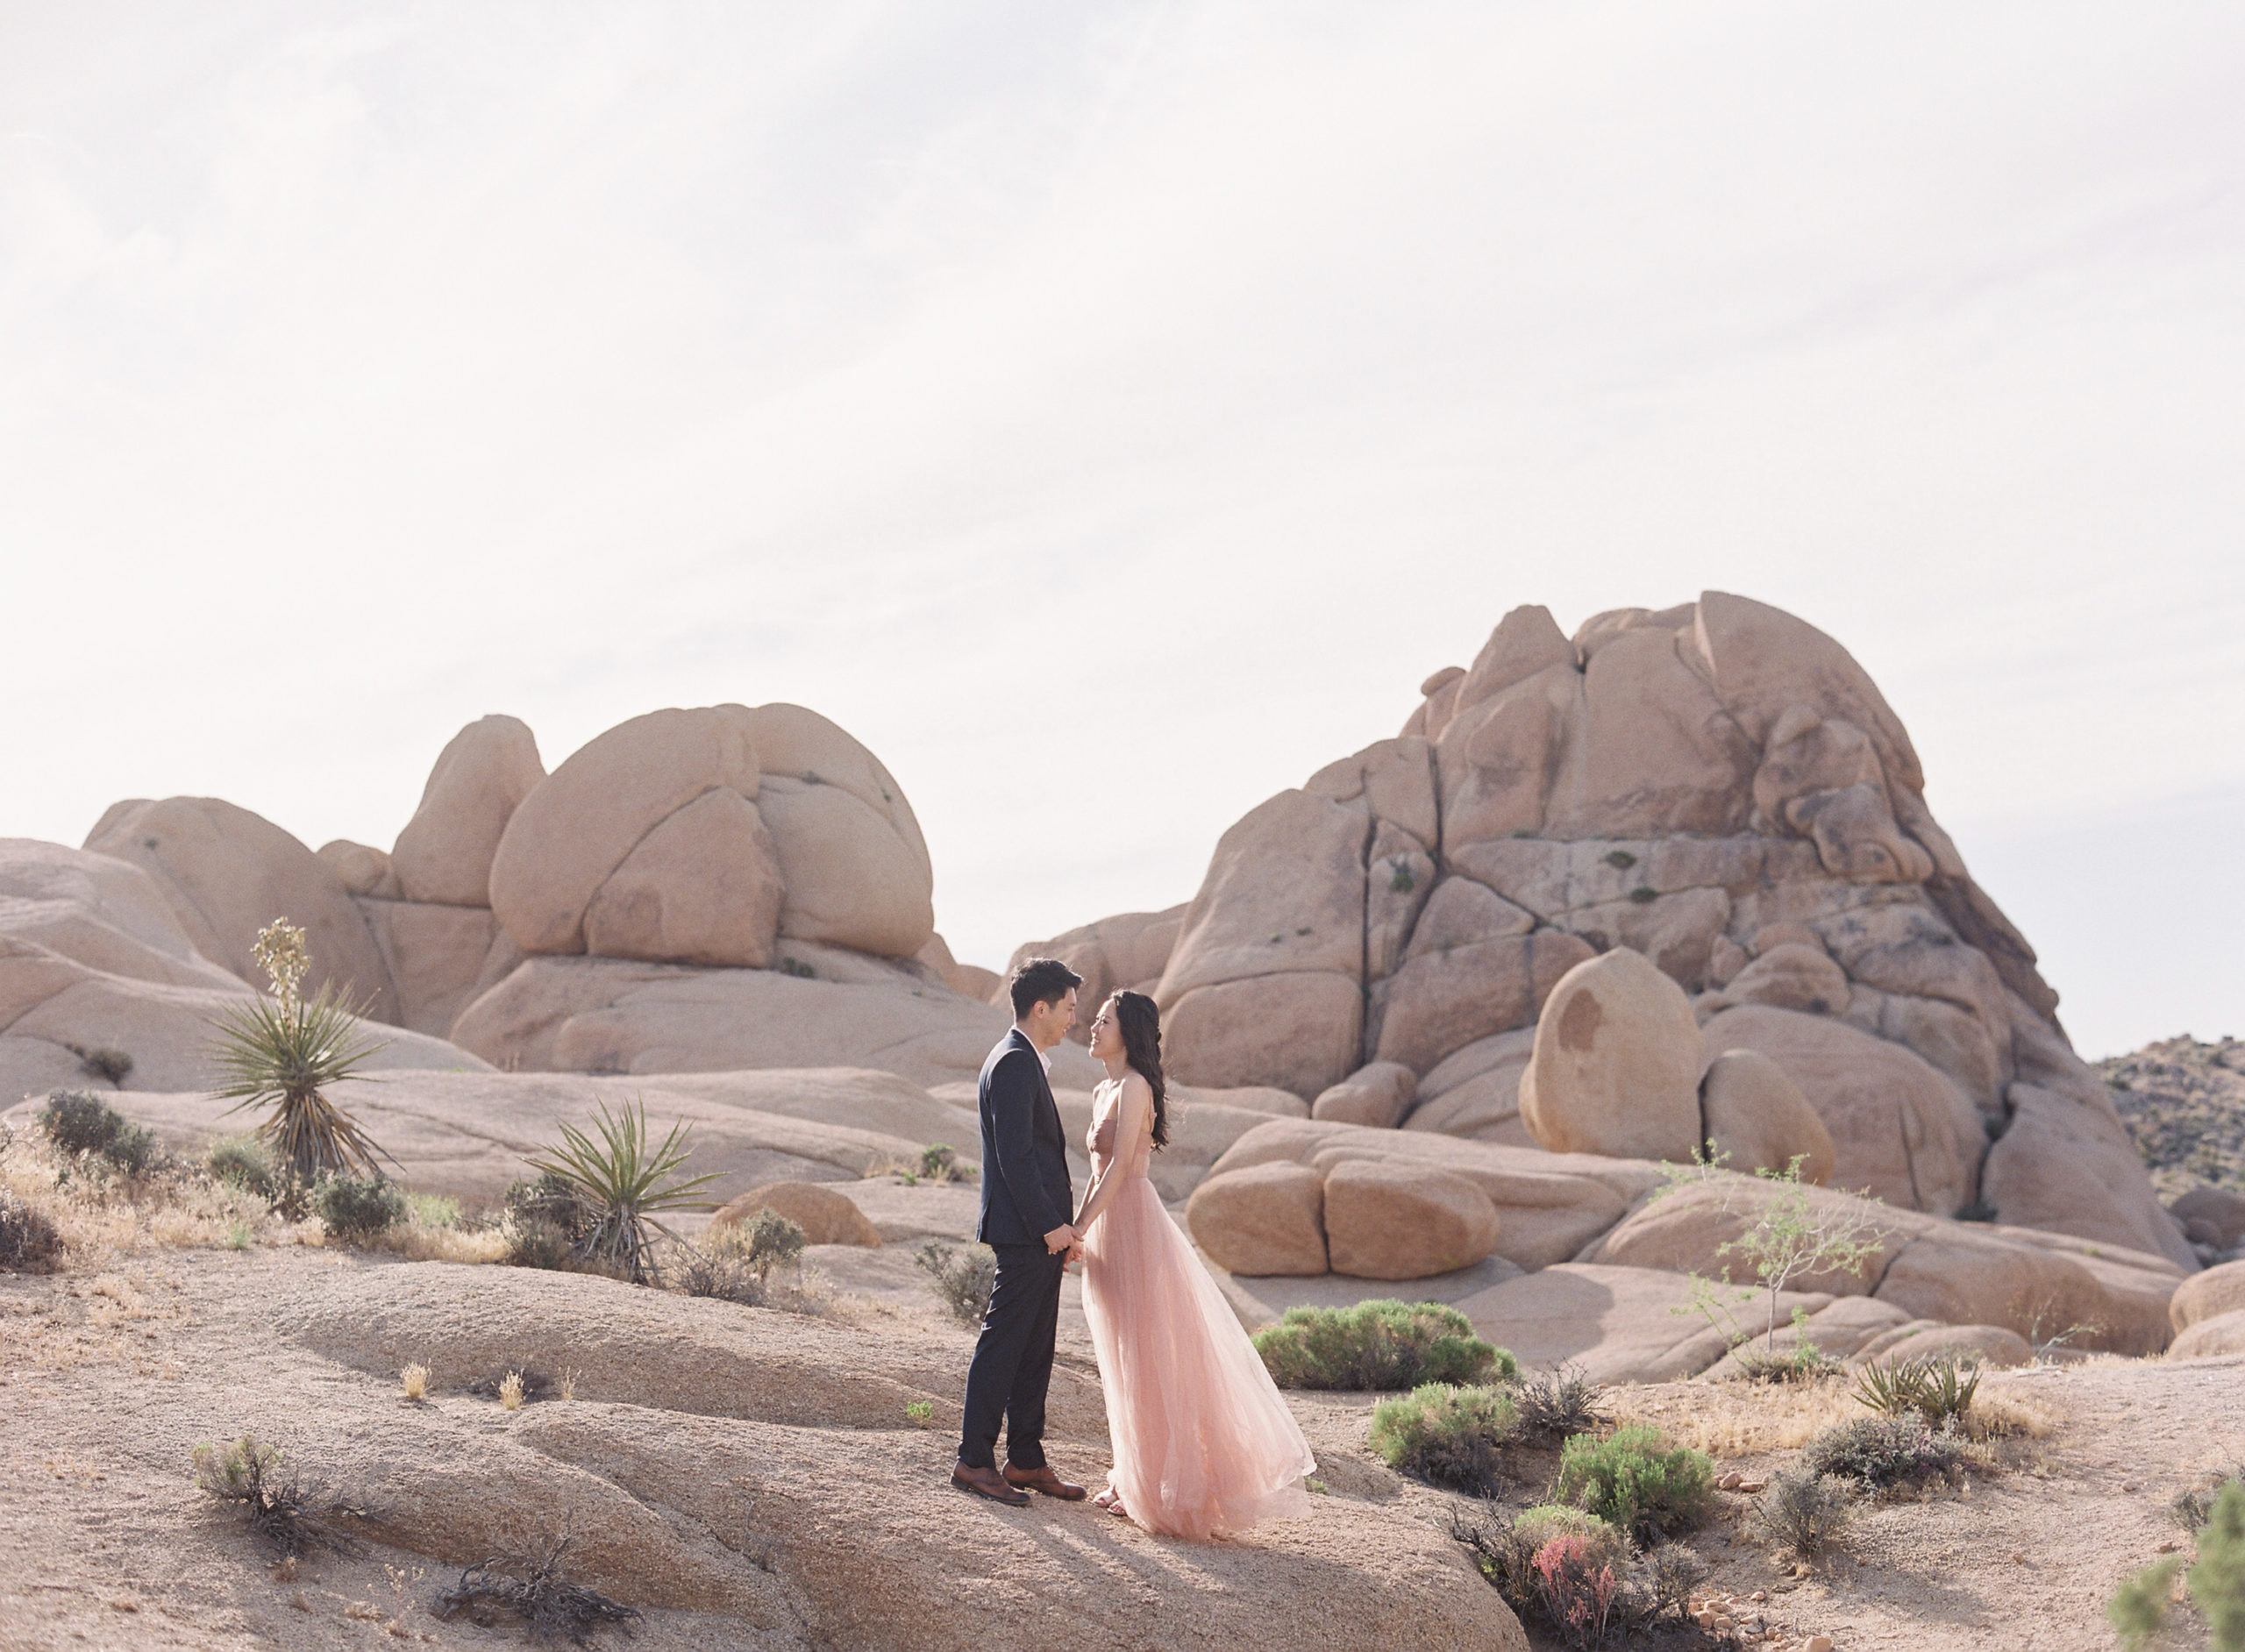 From family photo sessions to engagement and elopements, Joshua Tree portrait photography is stunning. There are so many beautiful scenes here, and the perfect spot to capture sunrise and sunset. #familyportrait #photography